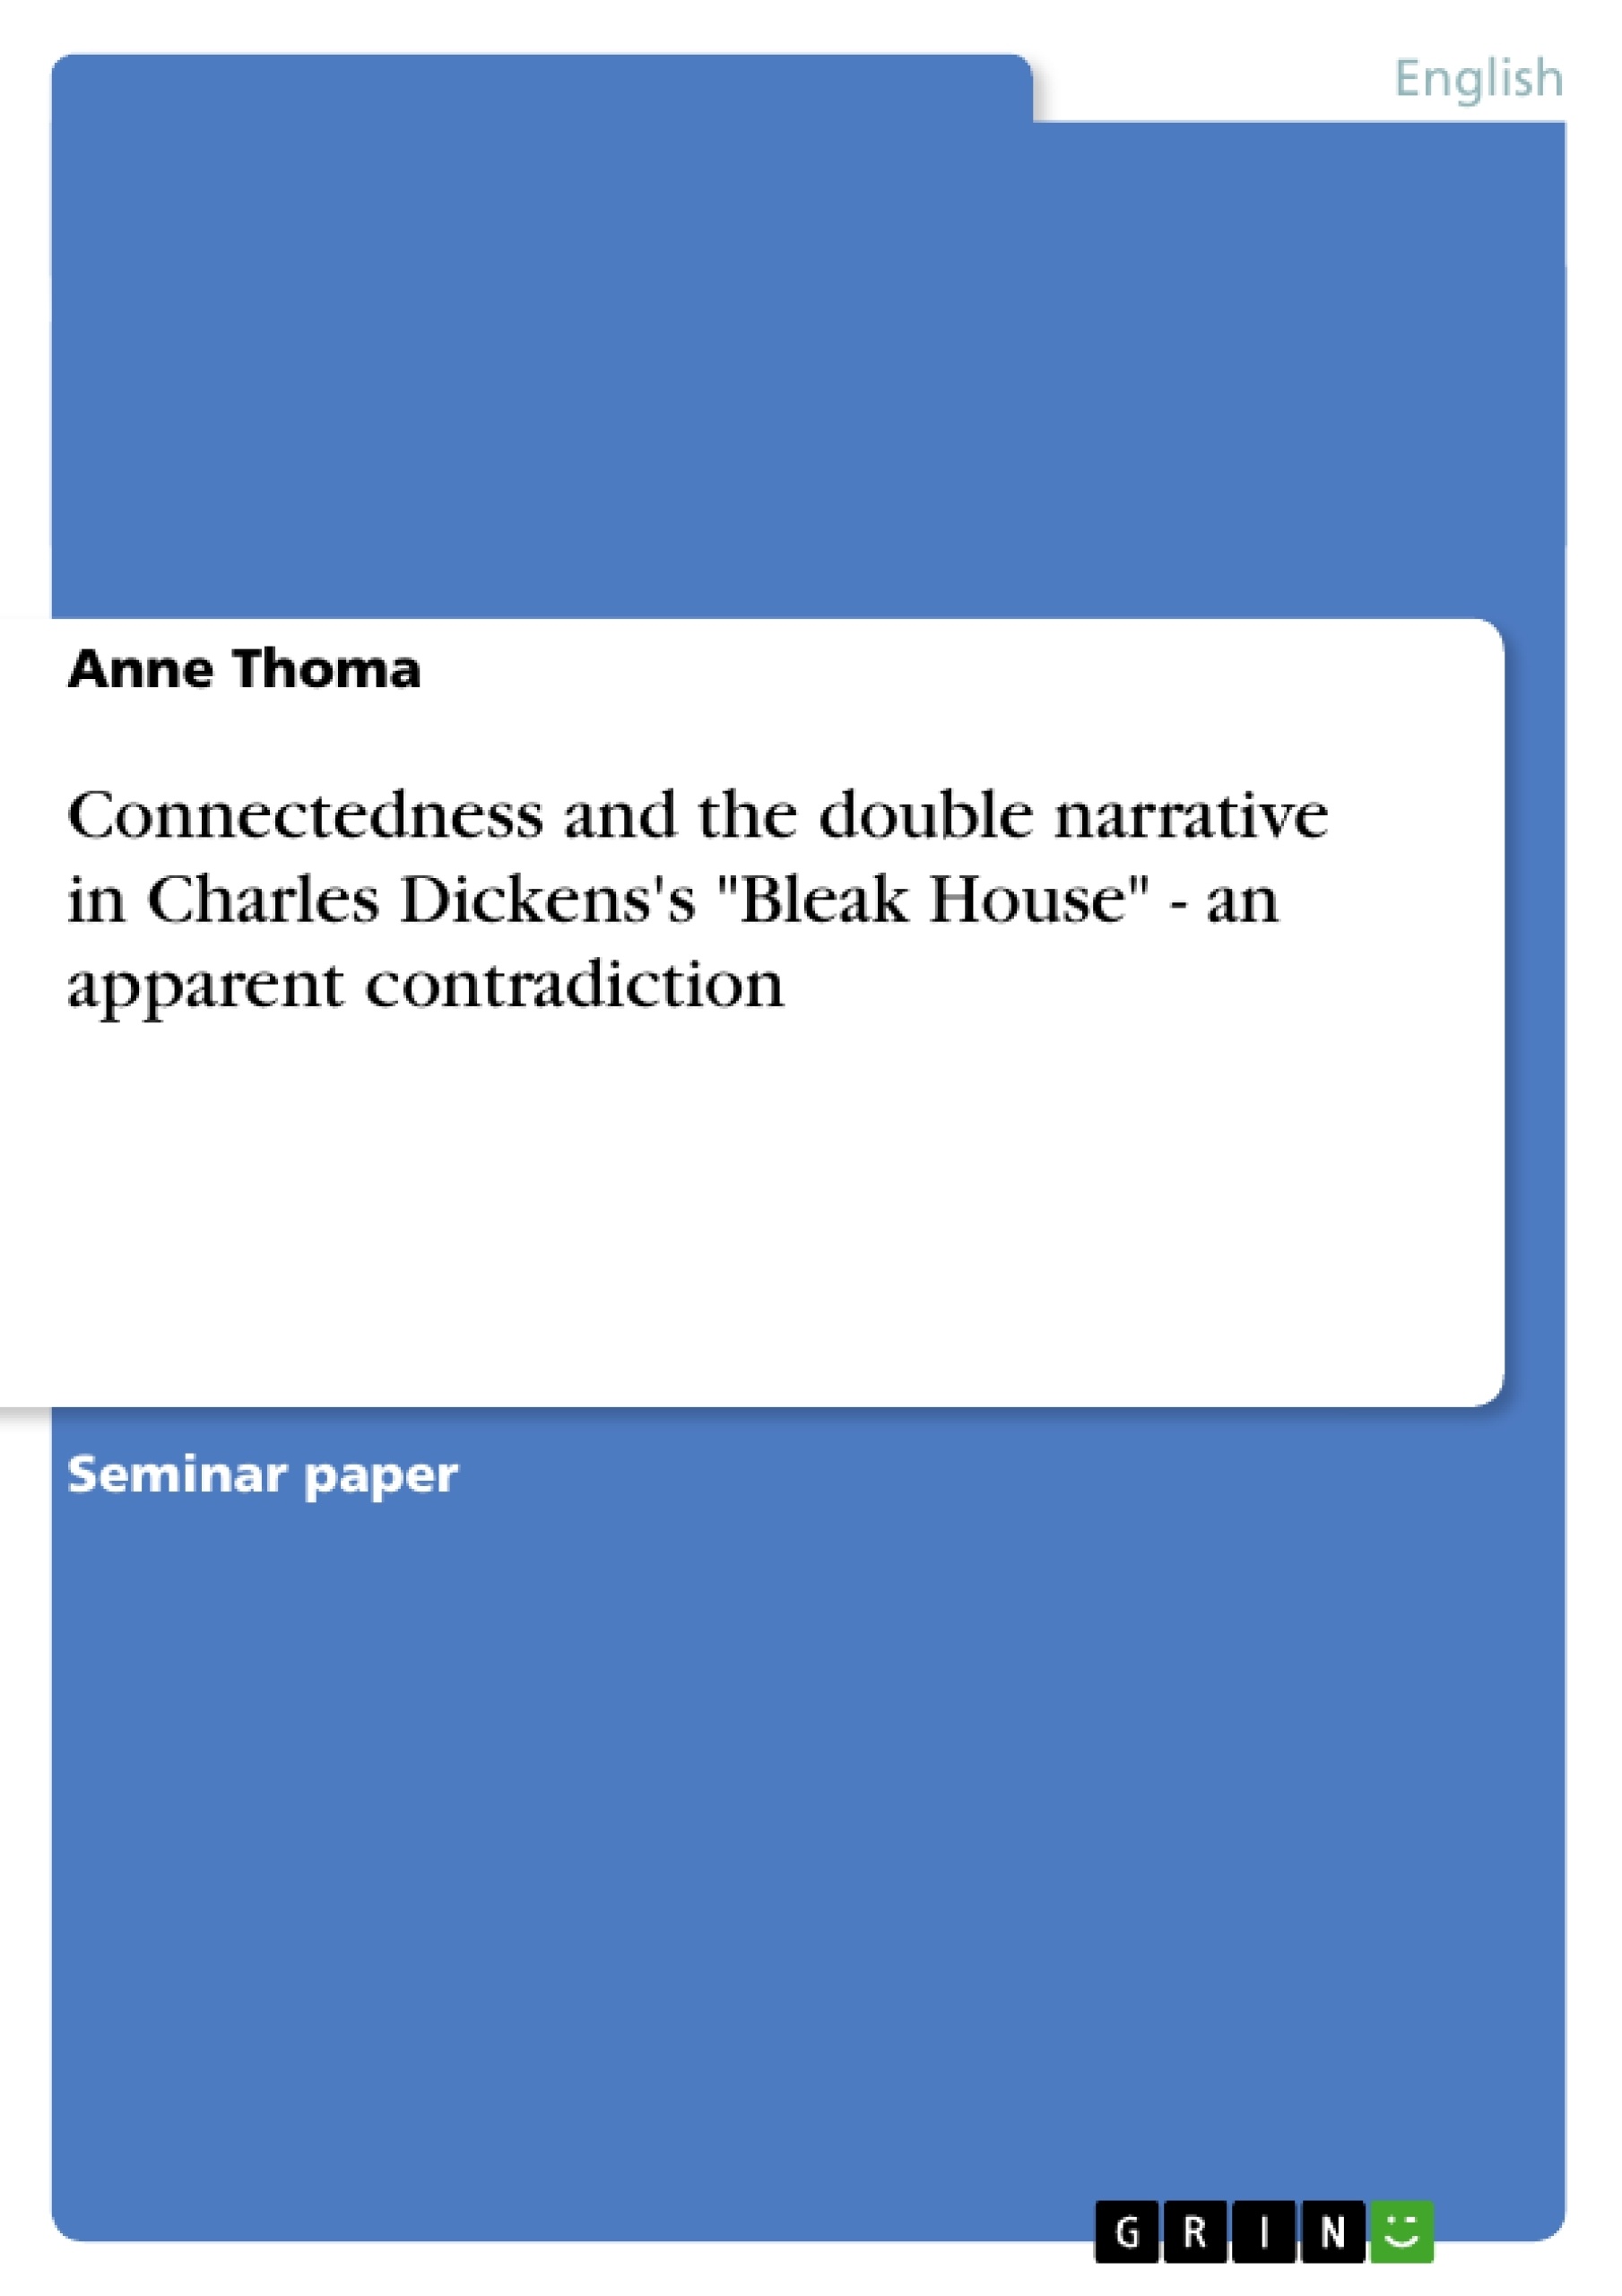 Titre: Connectedness and the double narrative in Charles Dickens's "Bleak House" - an apparent contradiction